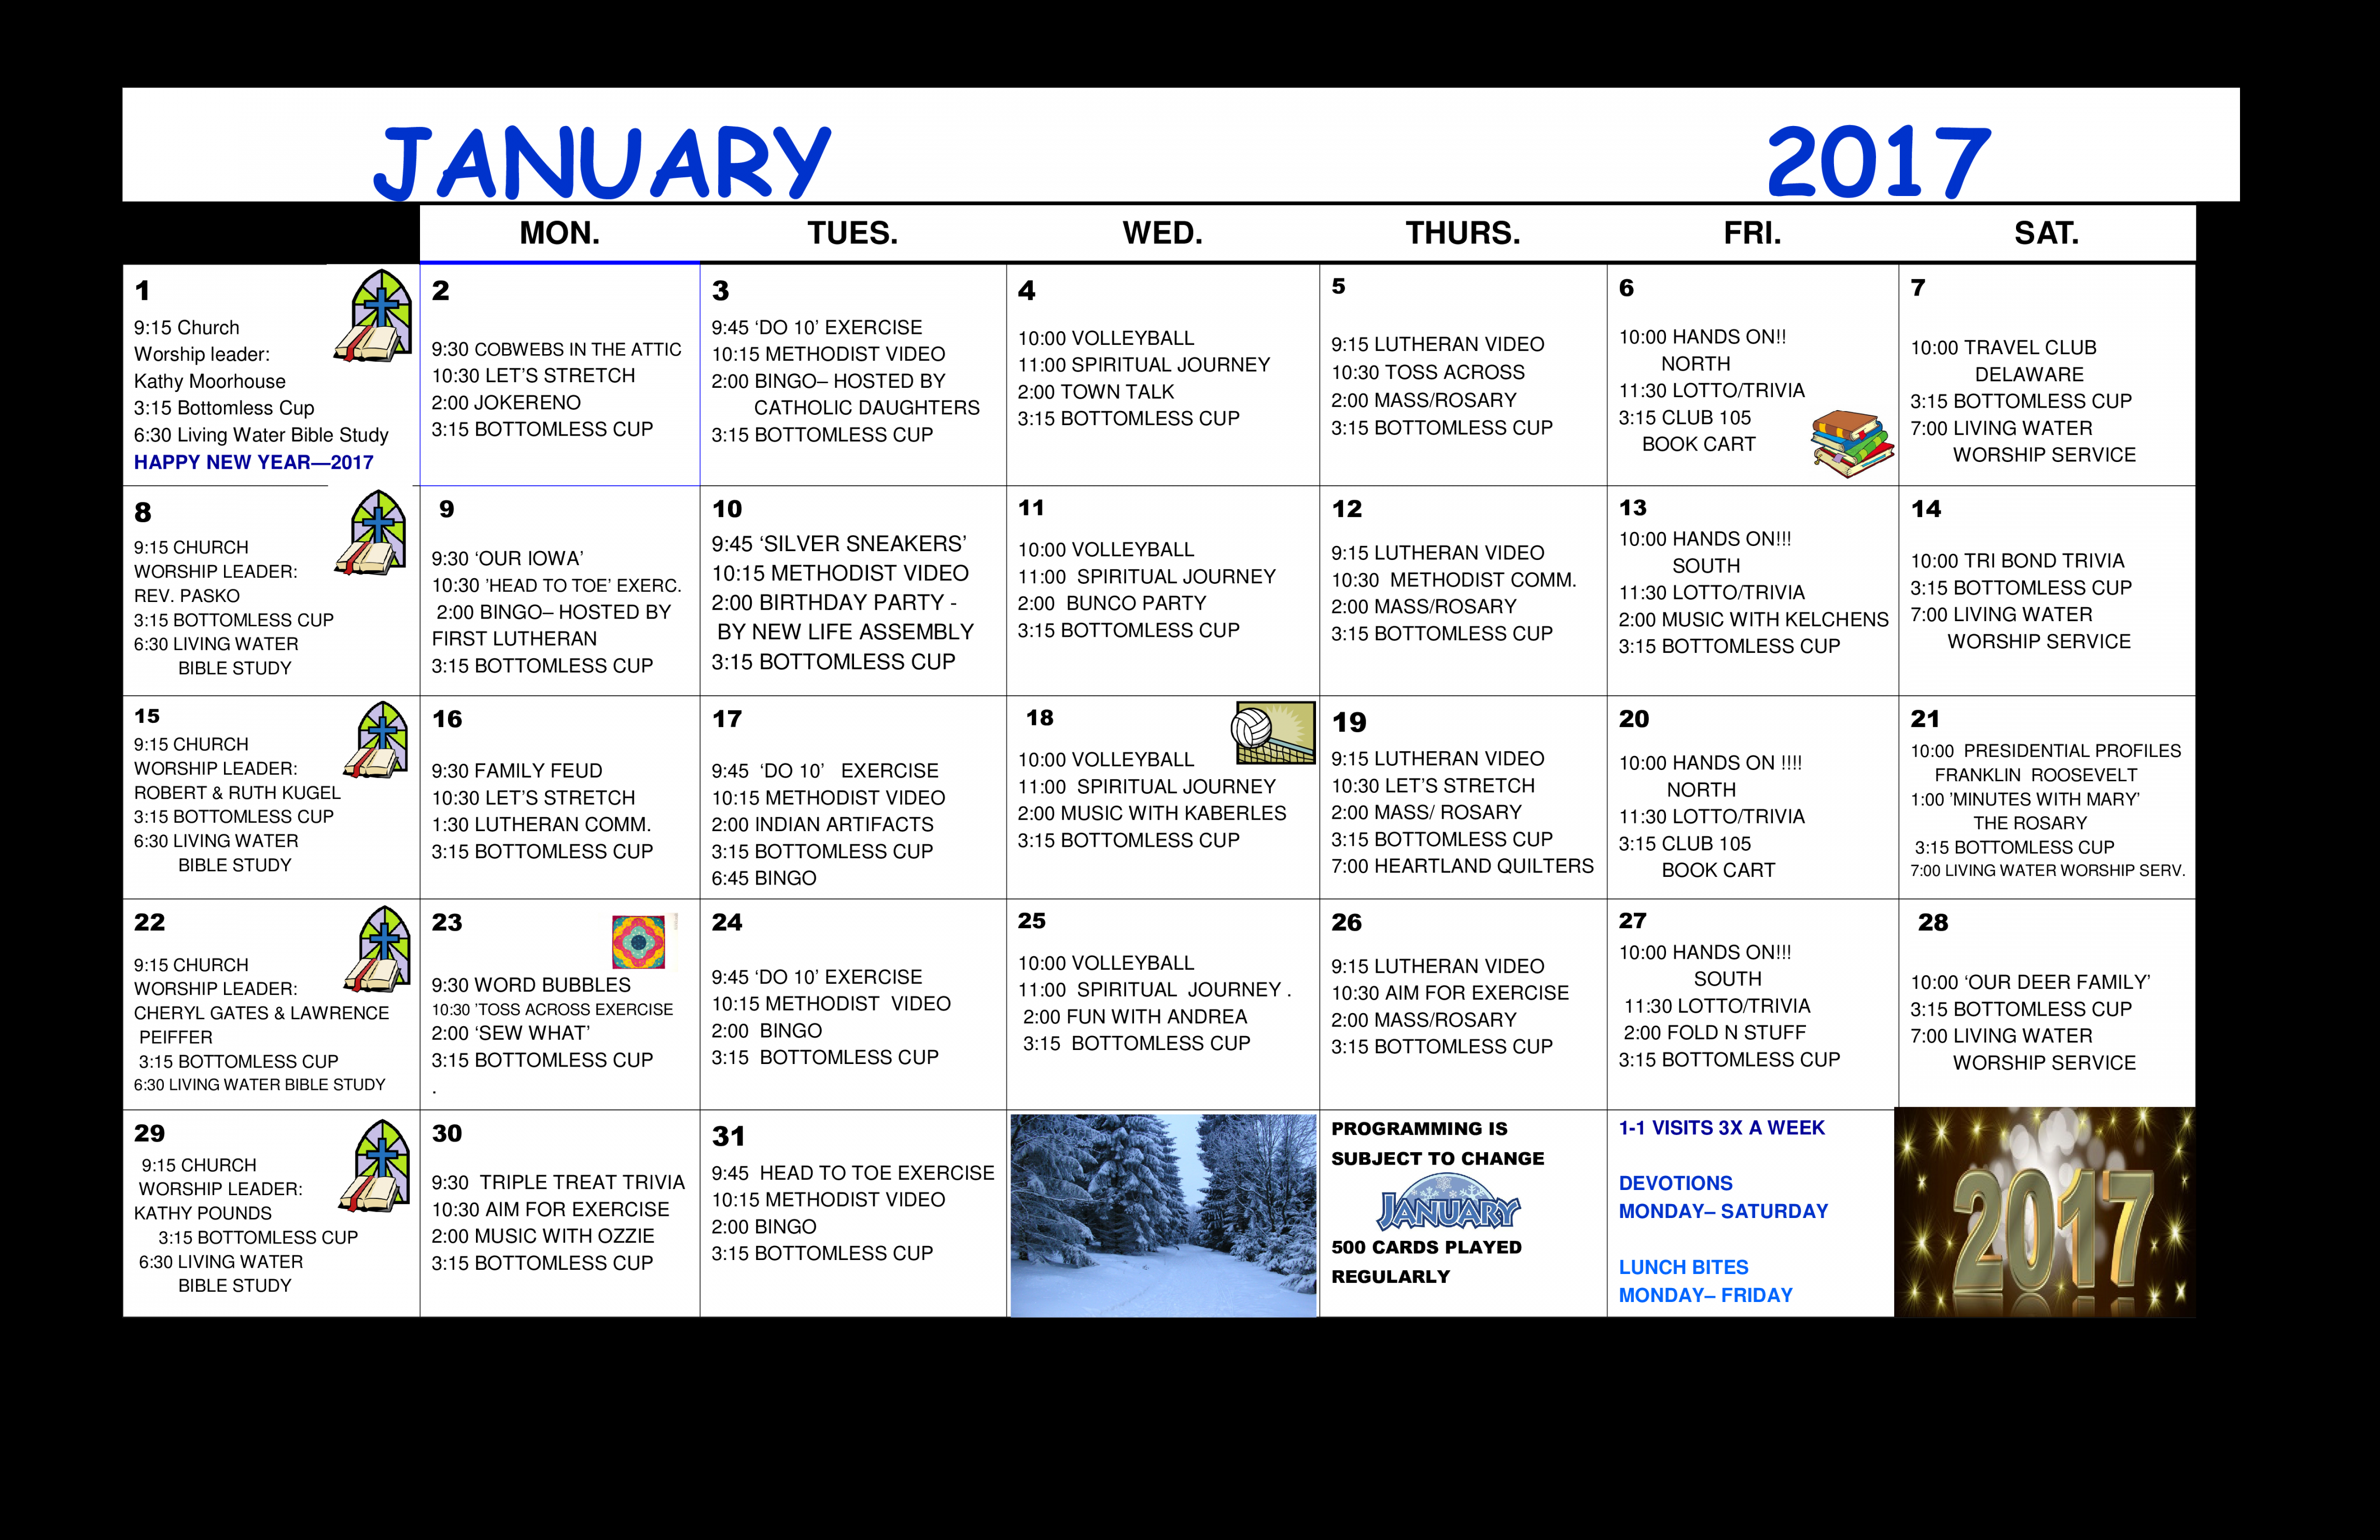 Monthly Activity Calendar - How to create a Monthly Activity